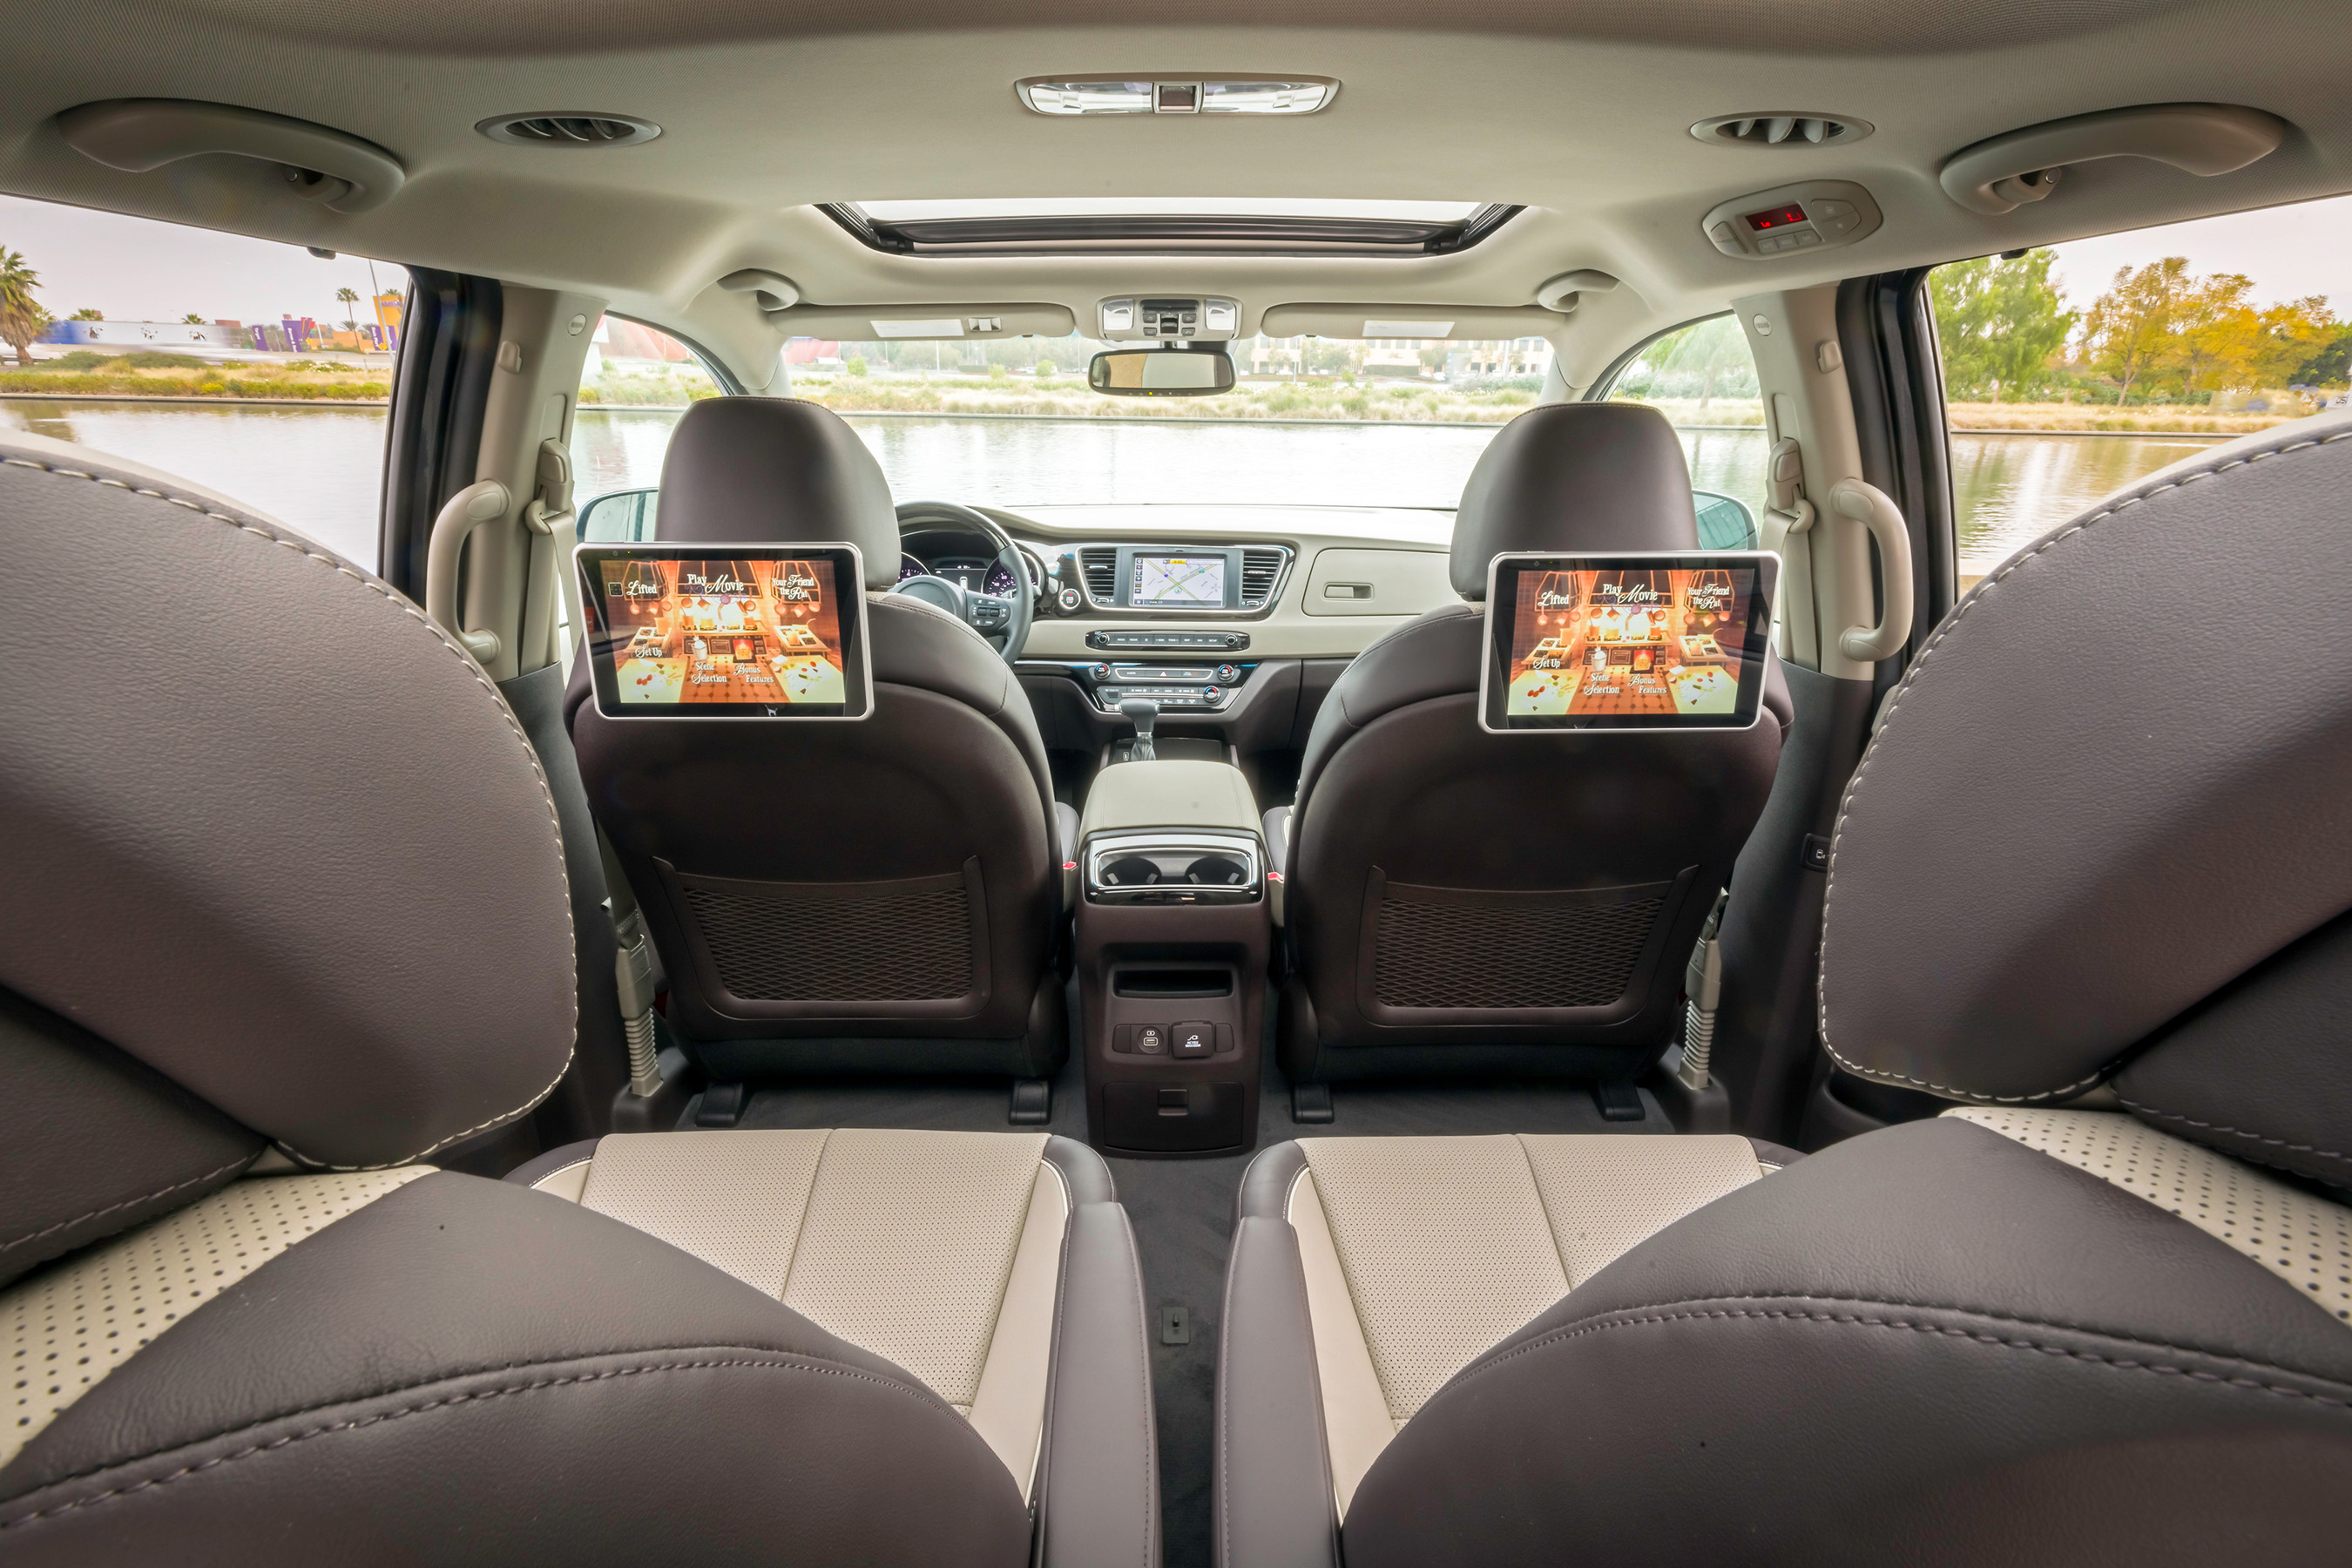 Available rear-seat entertainment system along with other convenience features keep the 2019 Kia Sedona’s tech roster up-to-date.